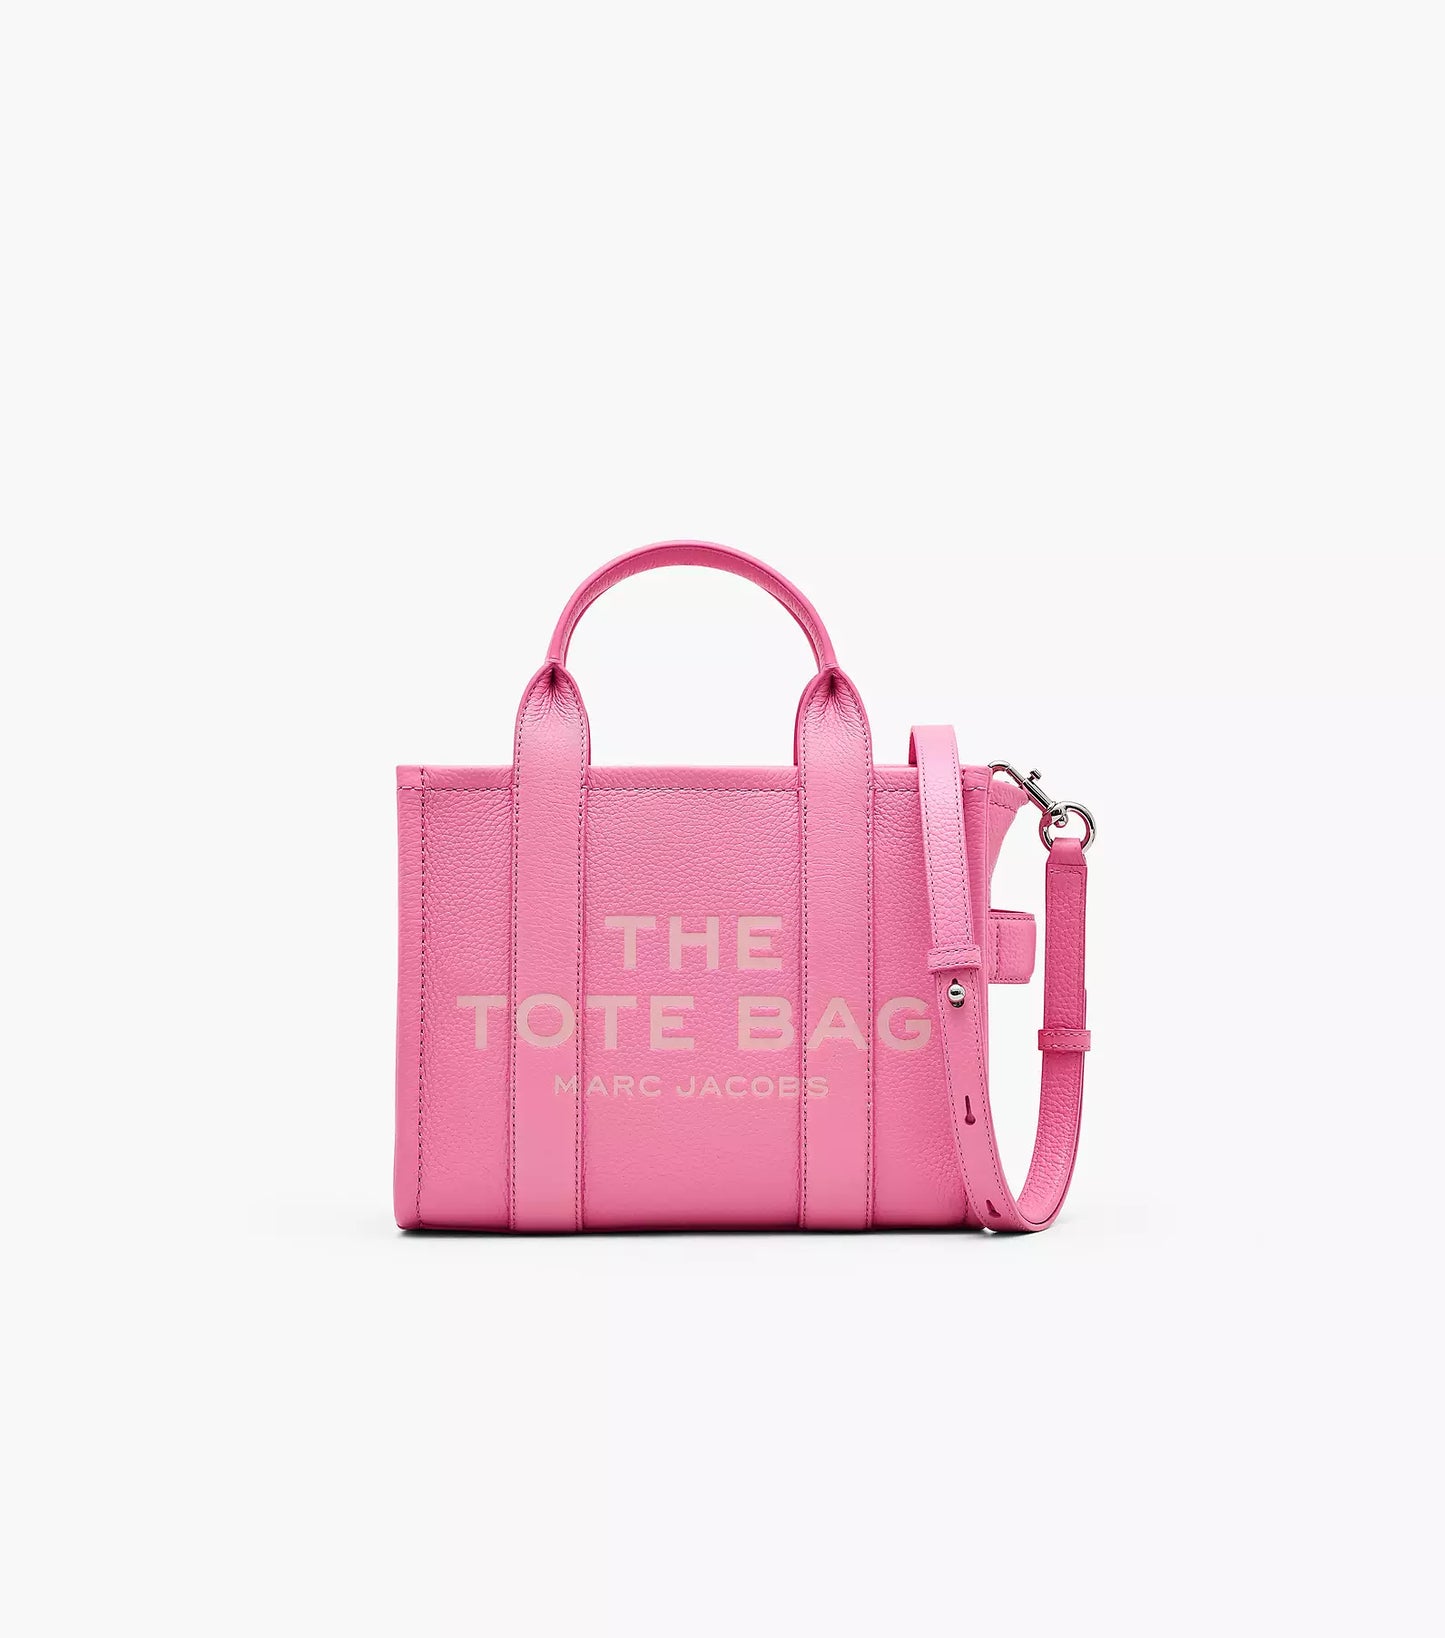 Marc Jacobs The Leather Tote Bag Micro